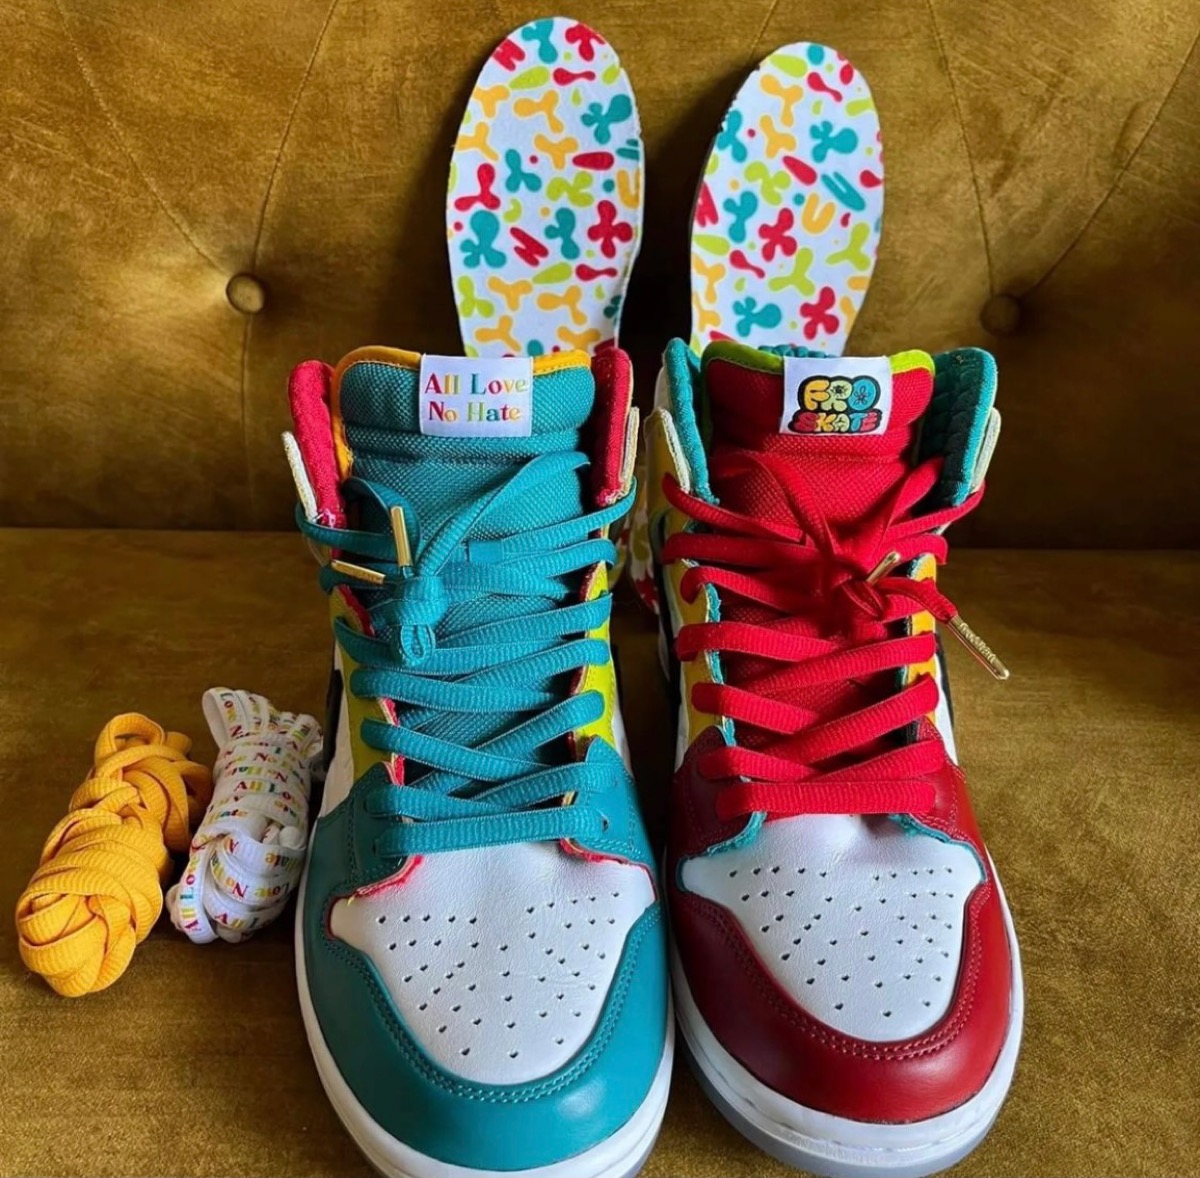 froSkate × Nike SB Dunk High Pro QS “All Love. No Hate”が国内8月13